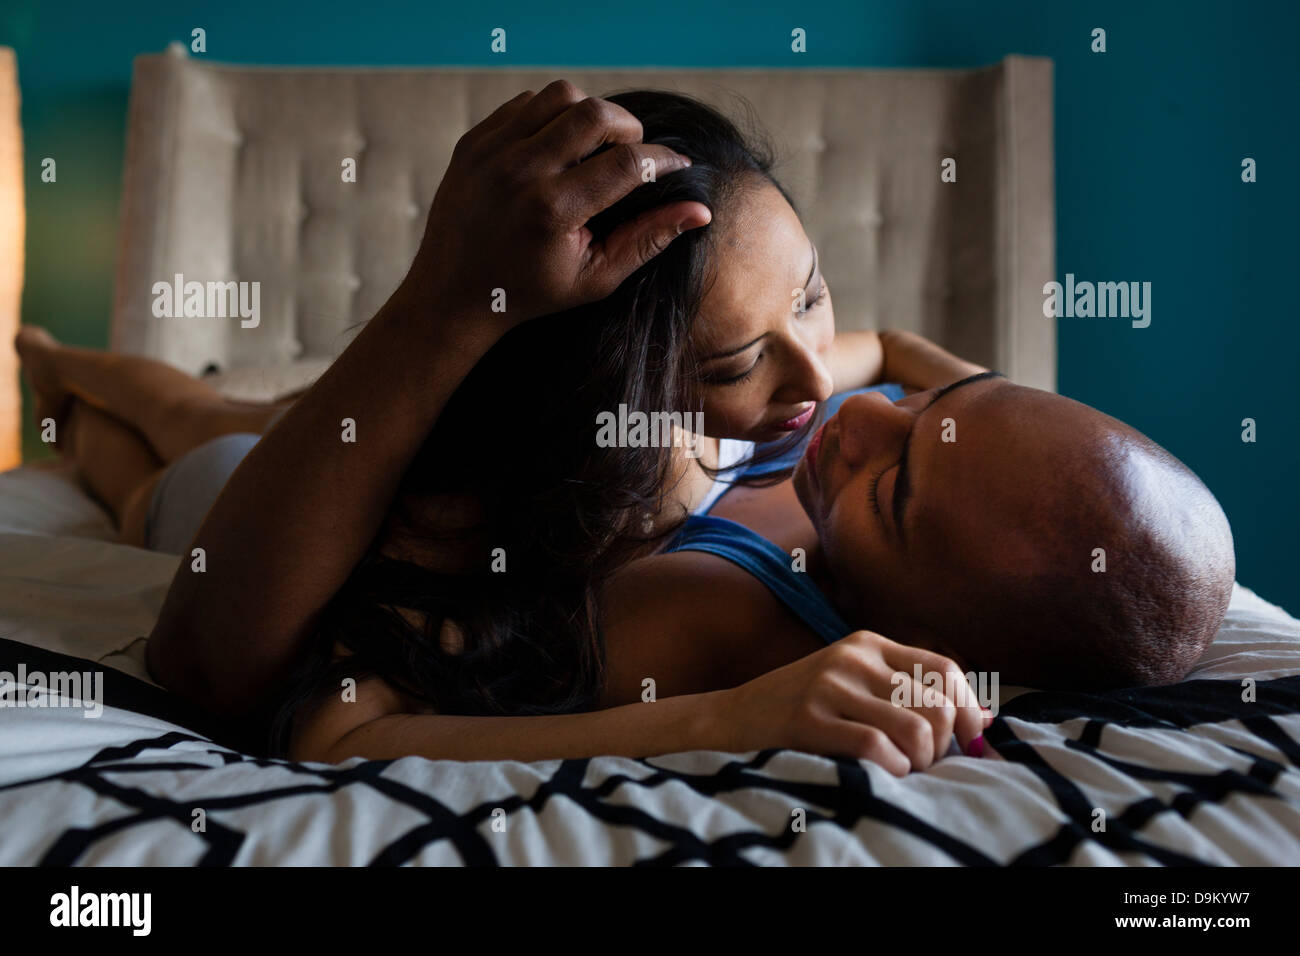 Couple kissing on bed Banque D'Images